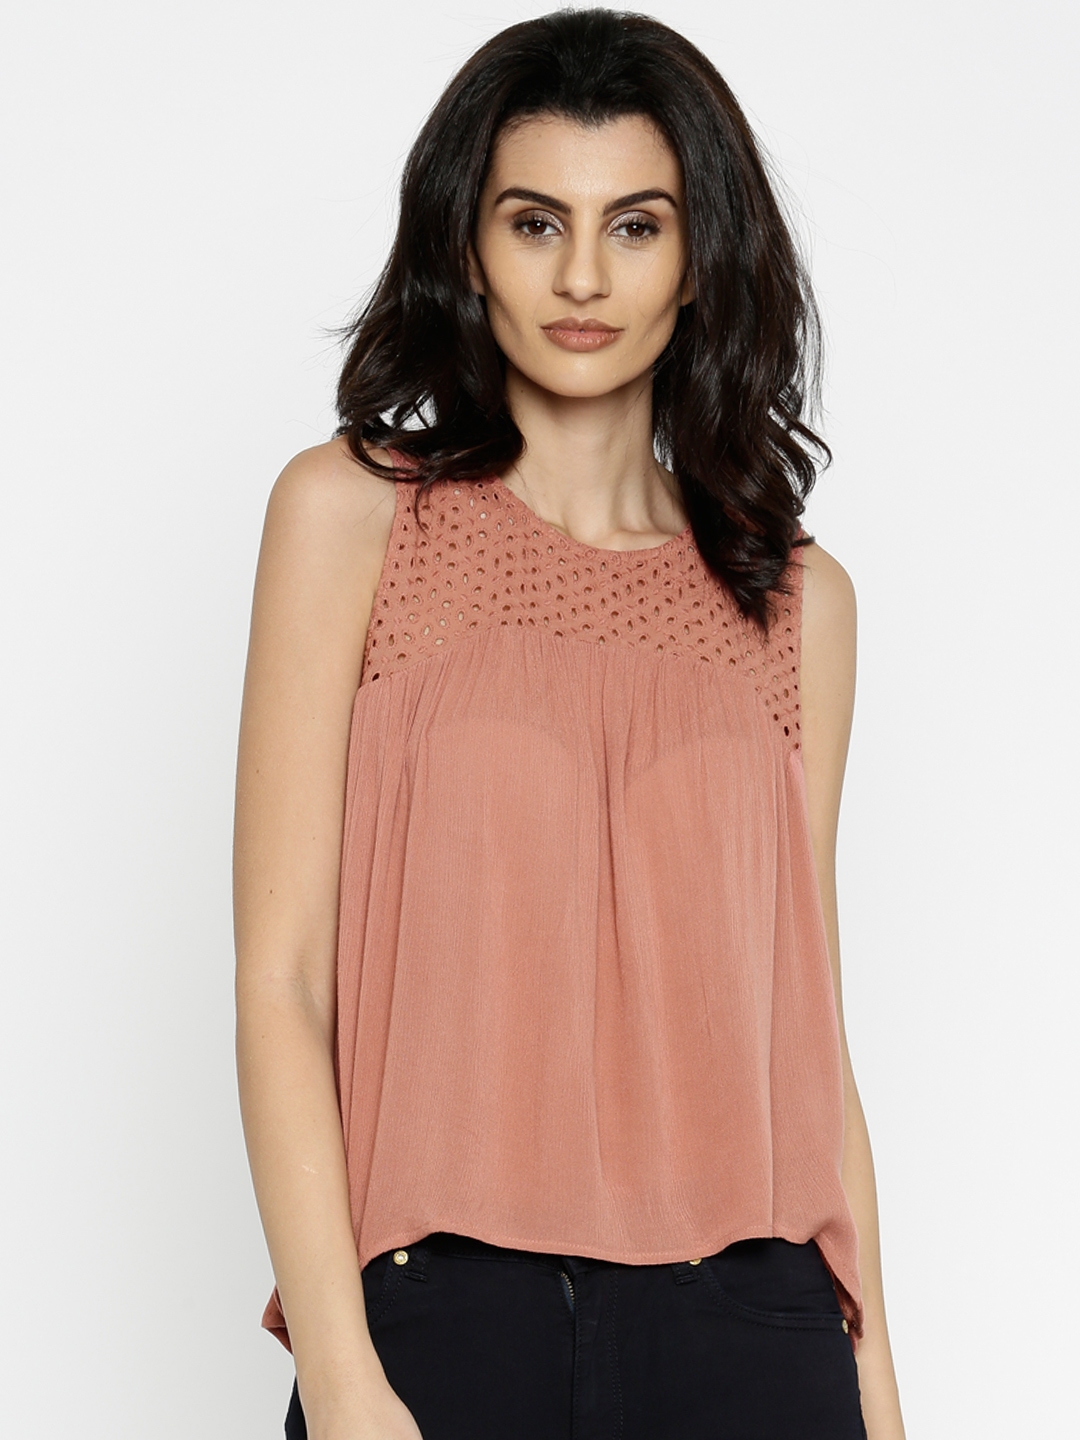 Buy ONLY Women Mauve Solid Top - Tops for Women 1717921 | Myntra